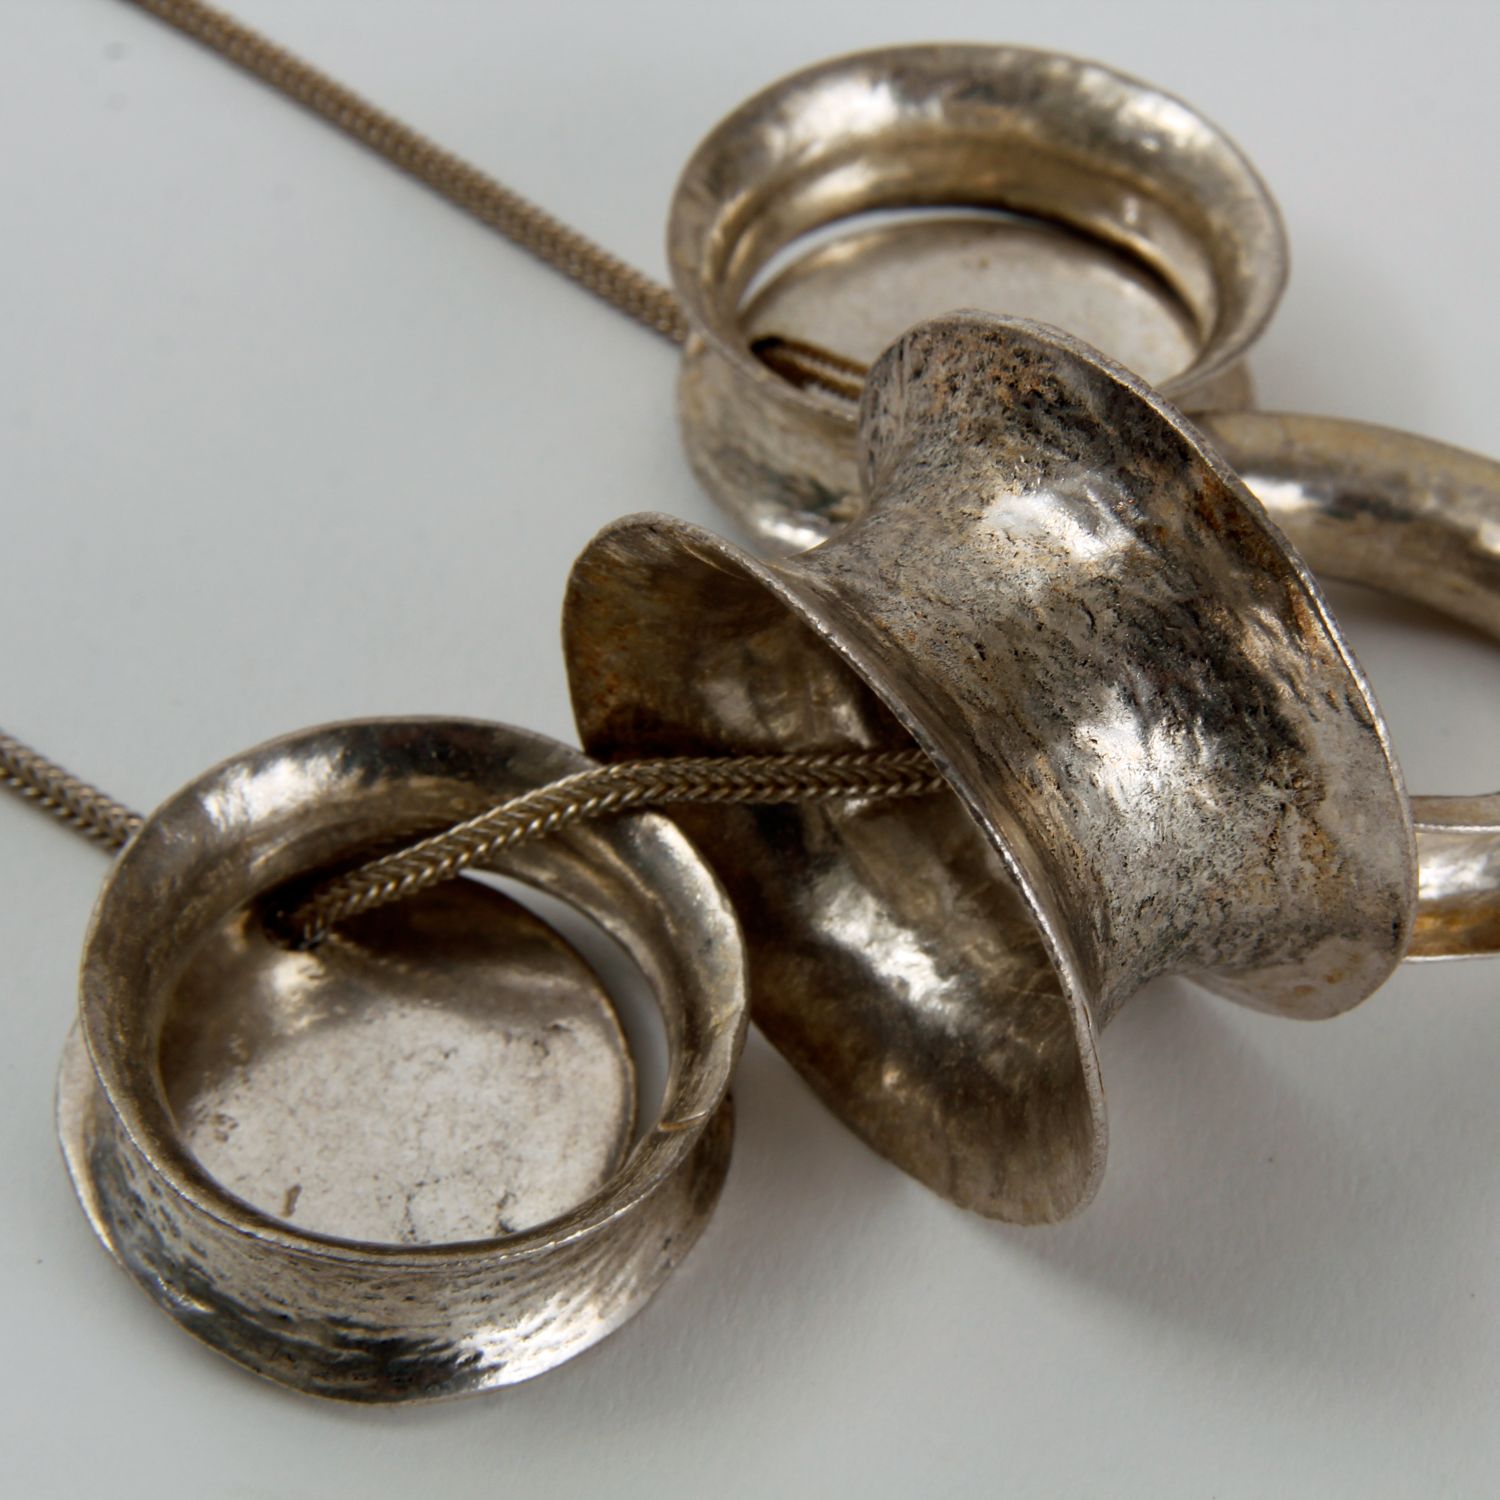 Elisabeth Riveiro: Necklace with Circular Rings Product Image 2 of 2